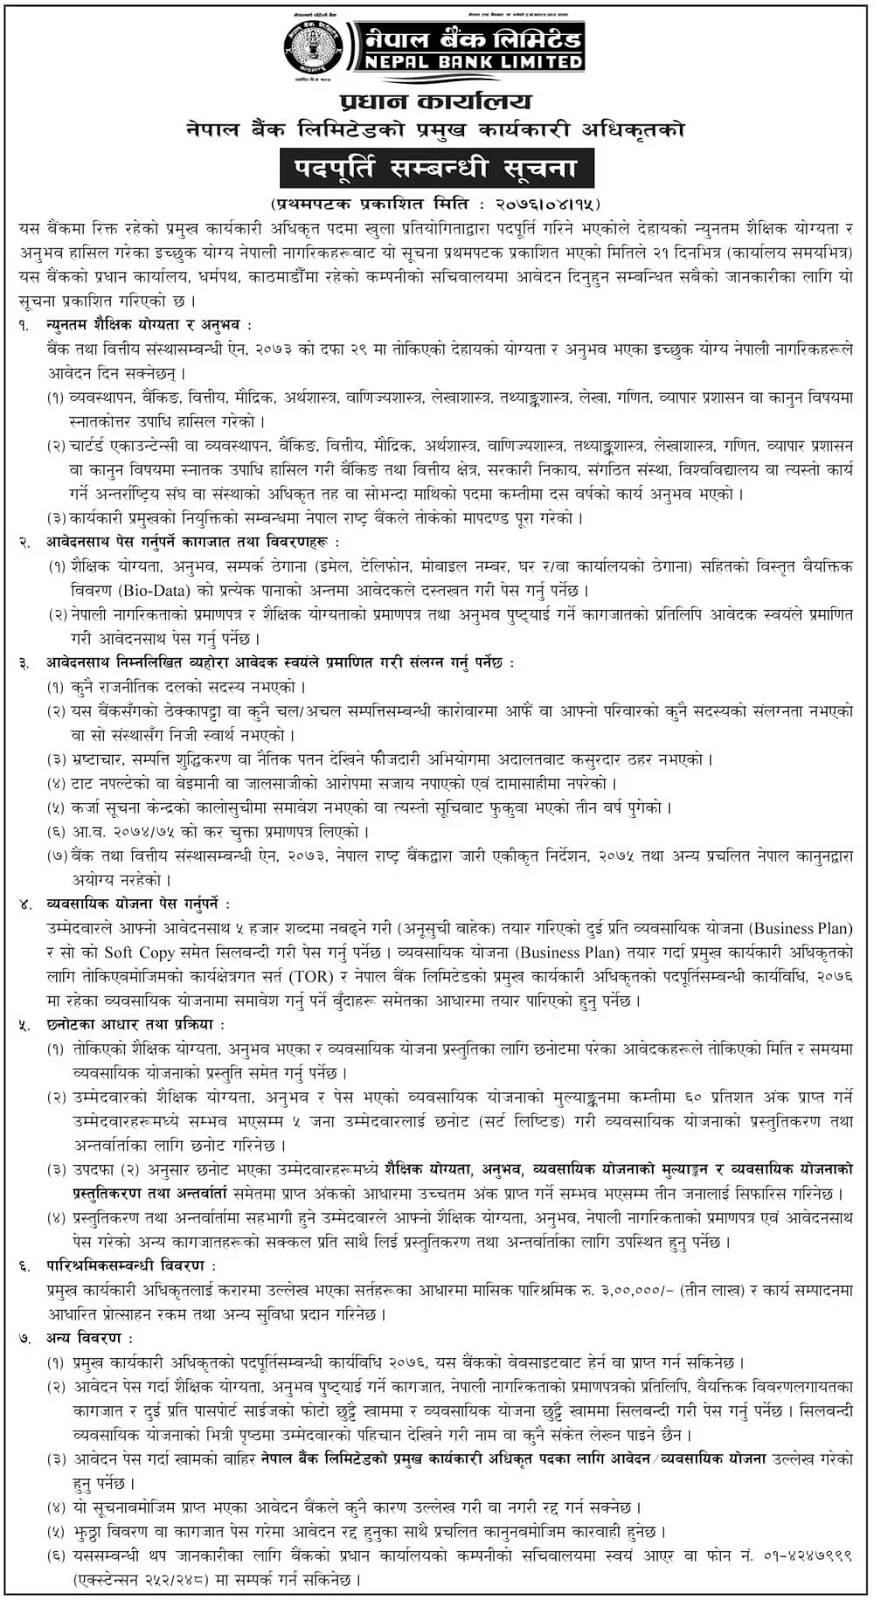 Nepal Bank Limited Vacancy Notice for CEO